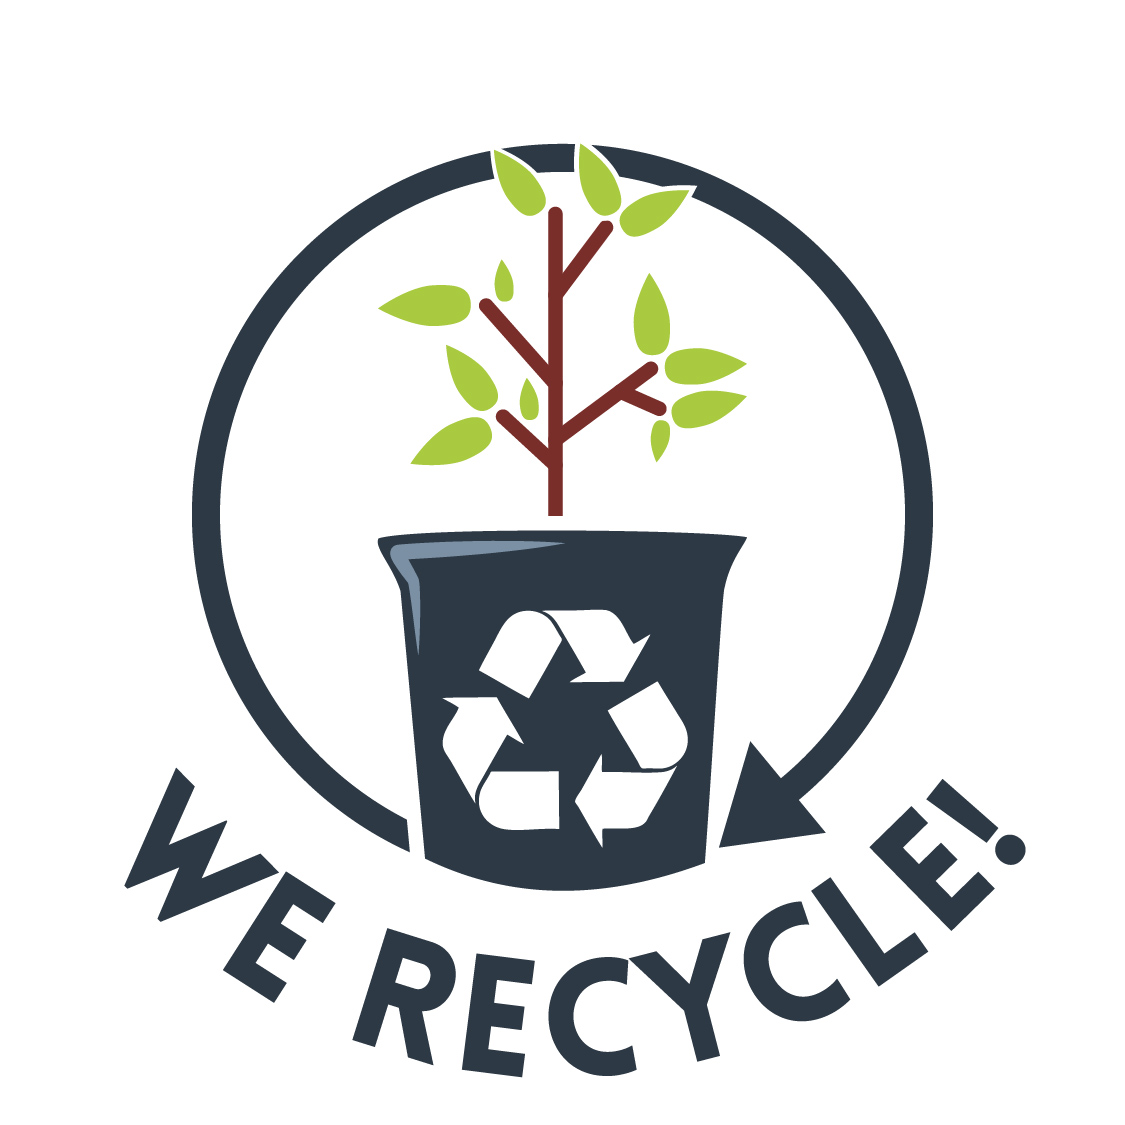 Other Clip Art for your Ag Recycling Programs